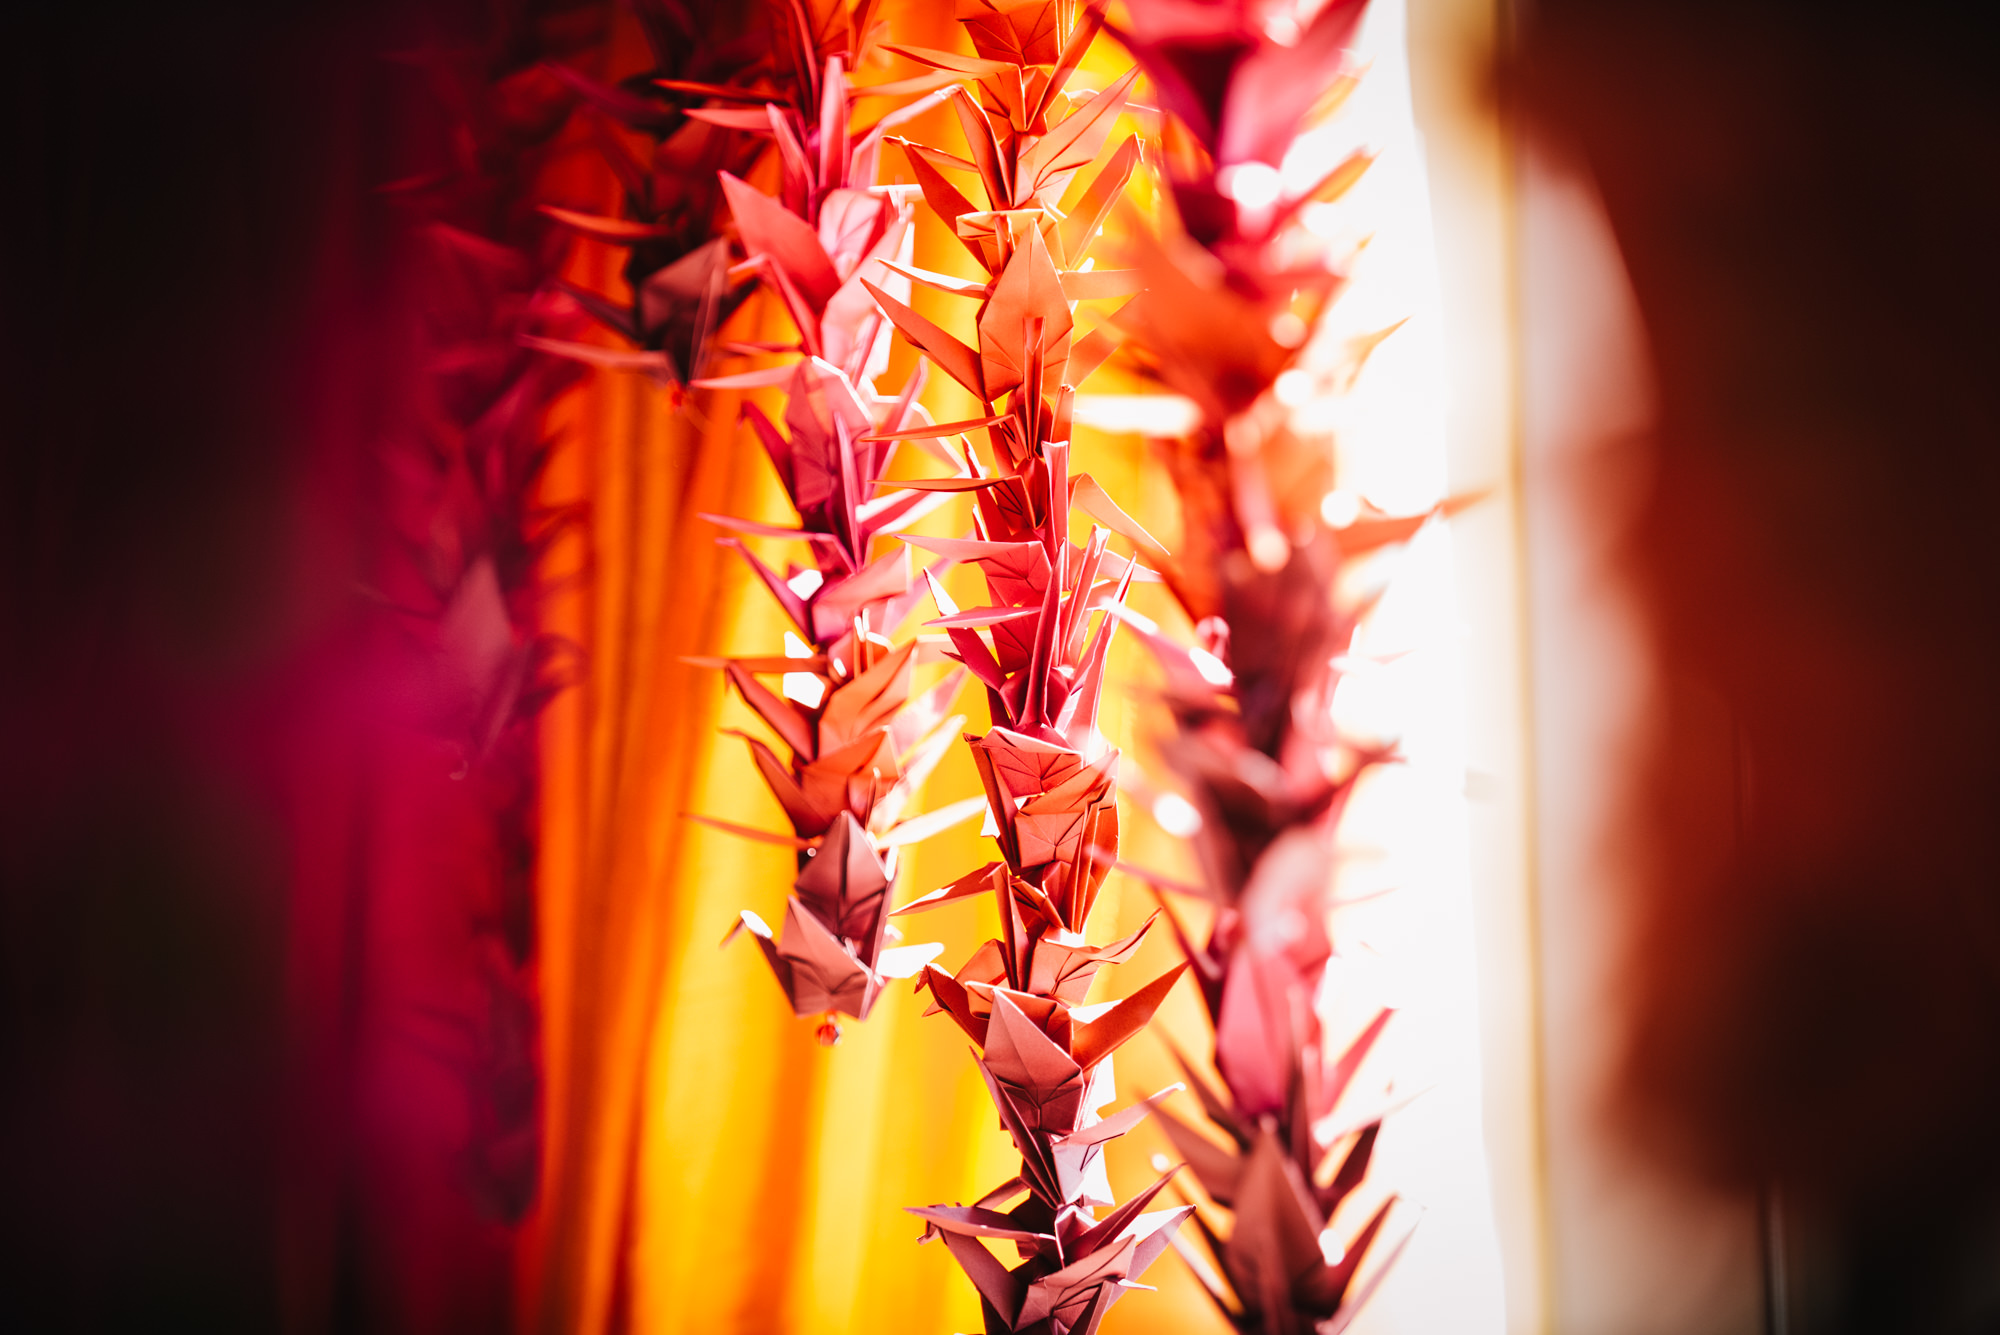 Origami cranes, a Japanese wedding tradition, decorating the dias where the Hindu ceremony will be performed at Julie and Neel's wedding at the Four Seasons Hotel, Seattle.